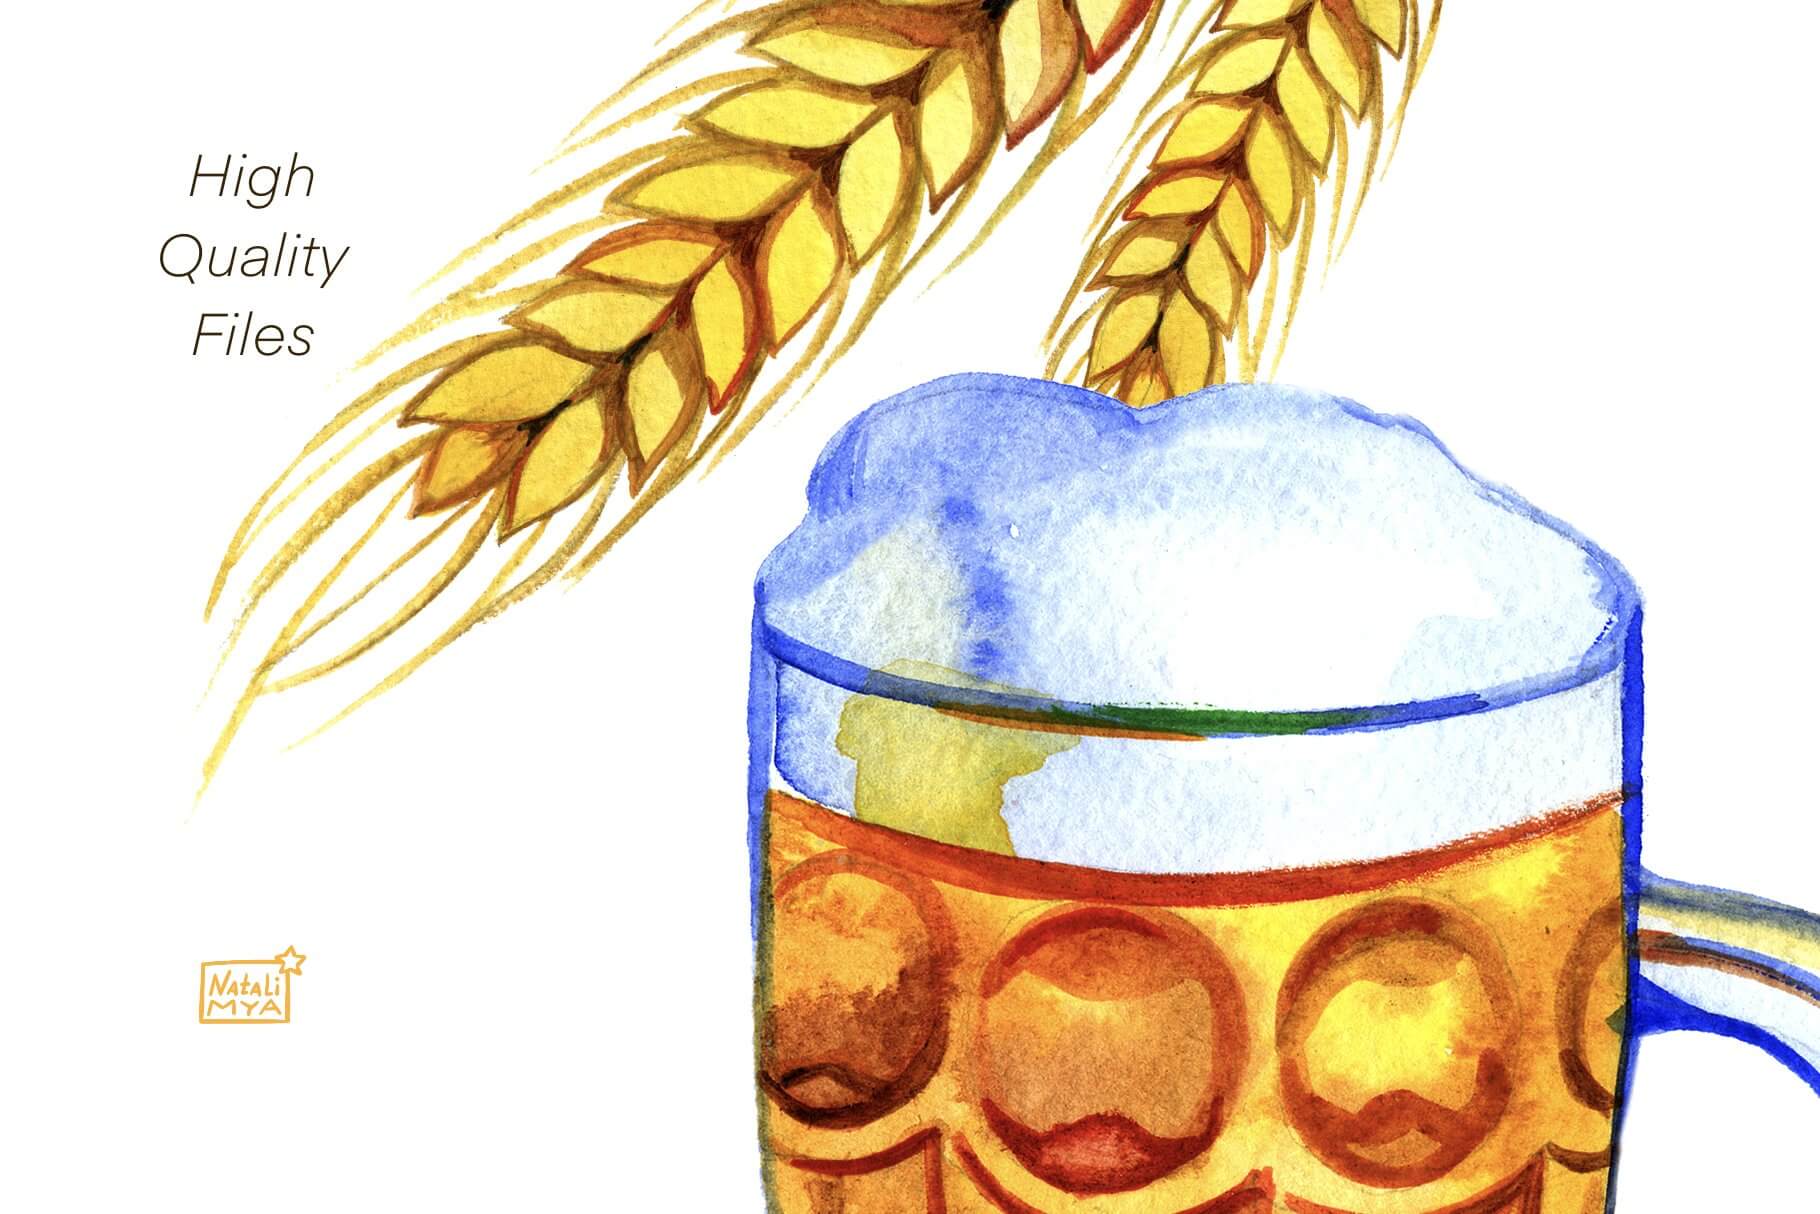 A close-up of an ear of wheat and beer.